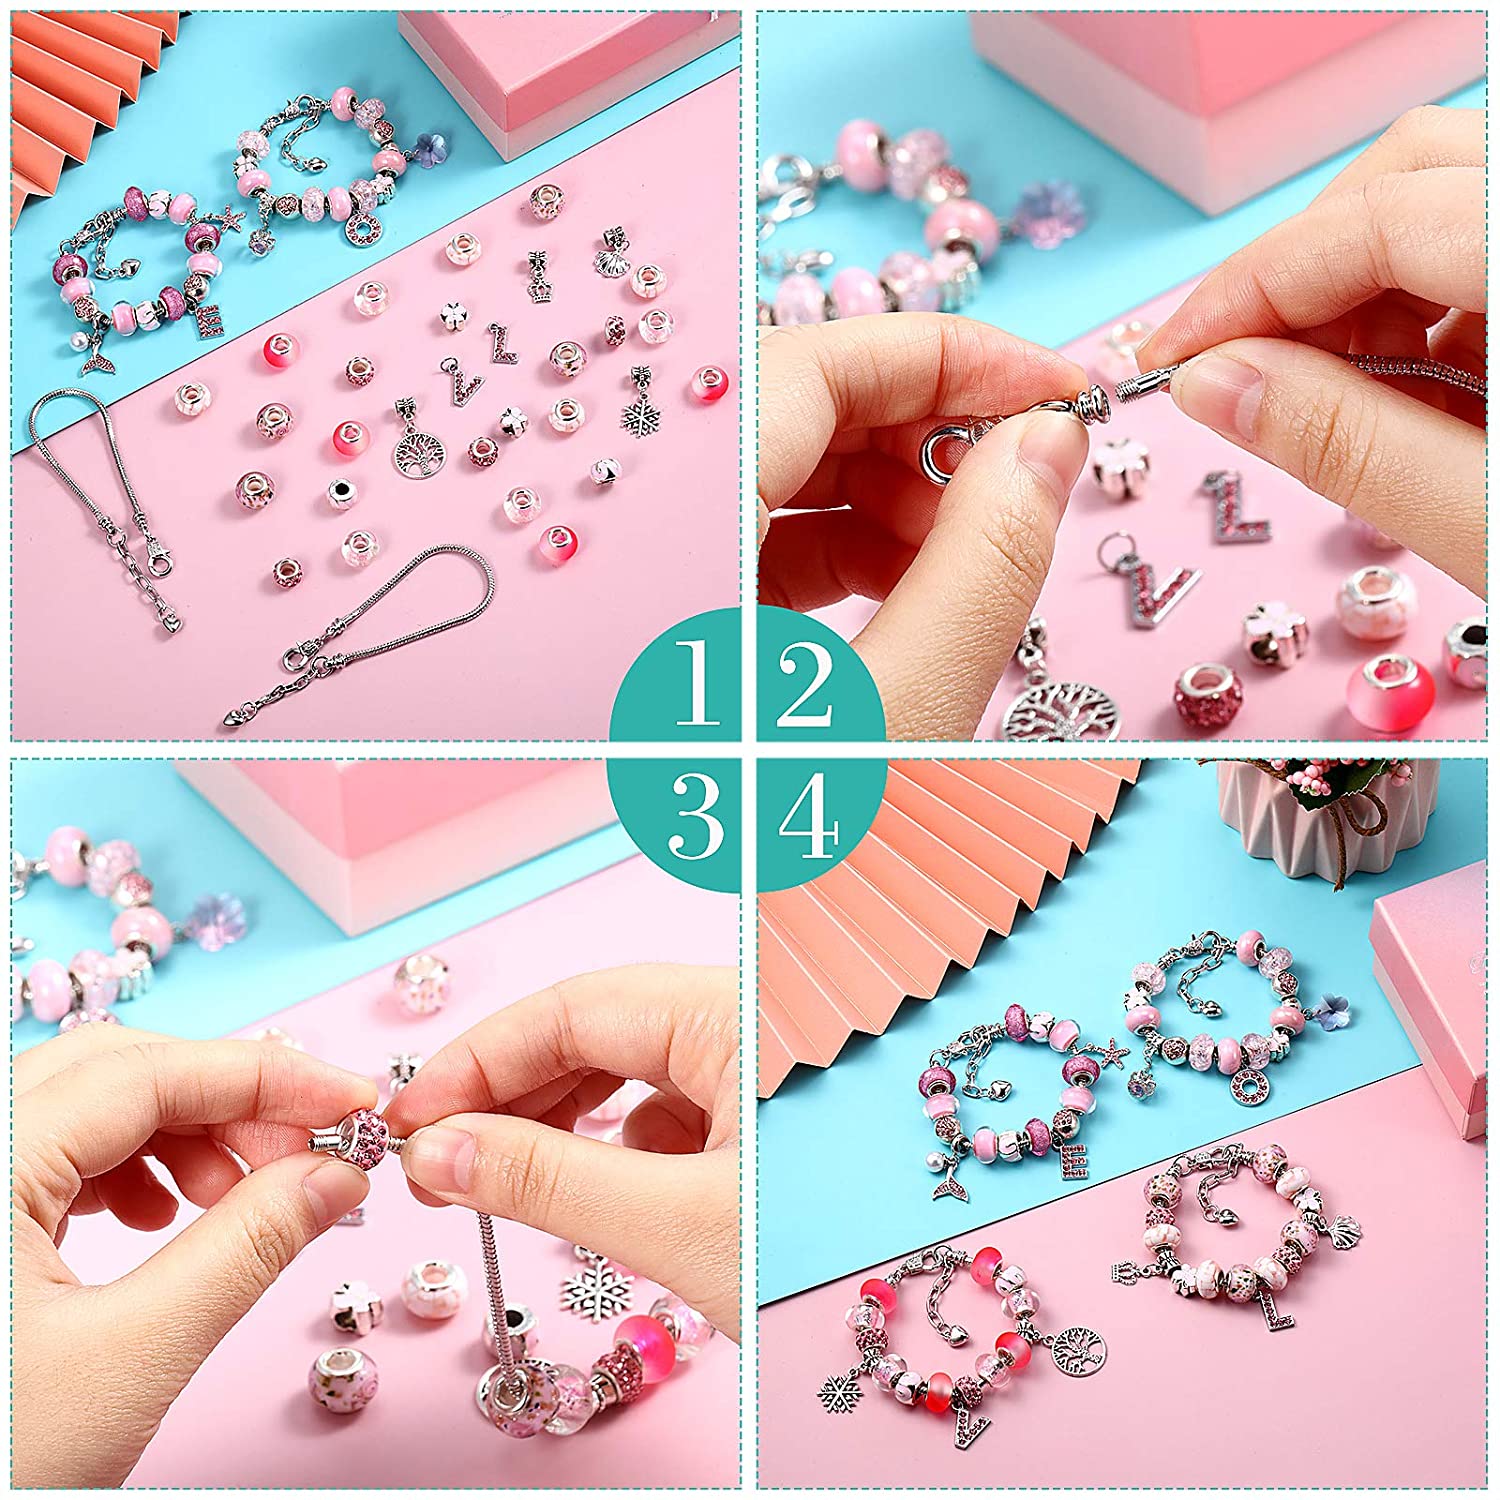 65 Pieces Charm Bracelet Kit, Assorted Pink Large Hole Glass Beads, Jewelry Pendant, Snake Bracelet Chain - image 4 of 7